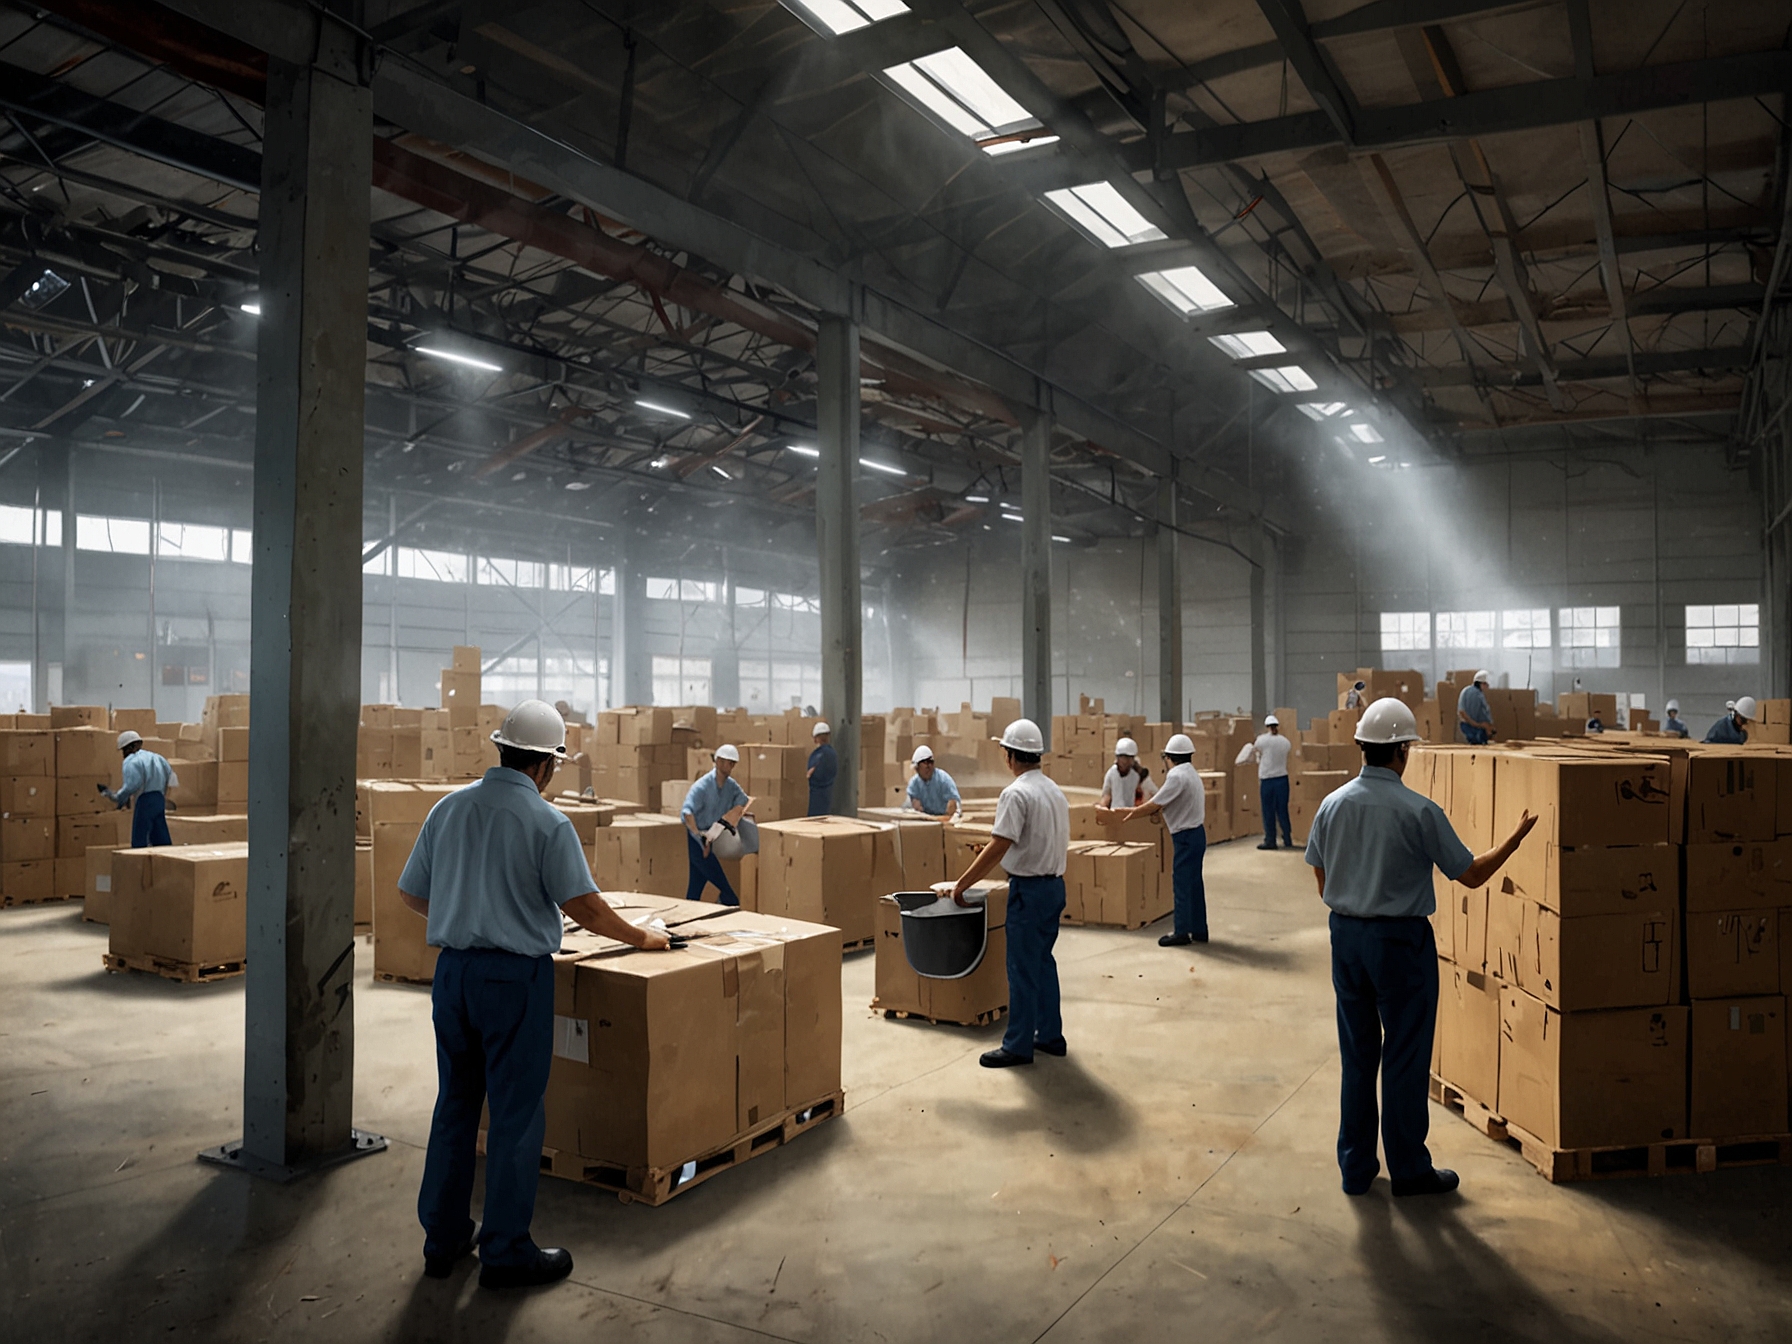 An image depicting workers in a large warehouse equipped with modern ventilation and air conditioning systems complying with California's new indoor heat protection standards.